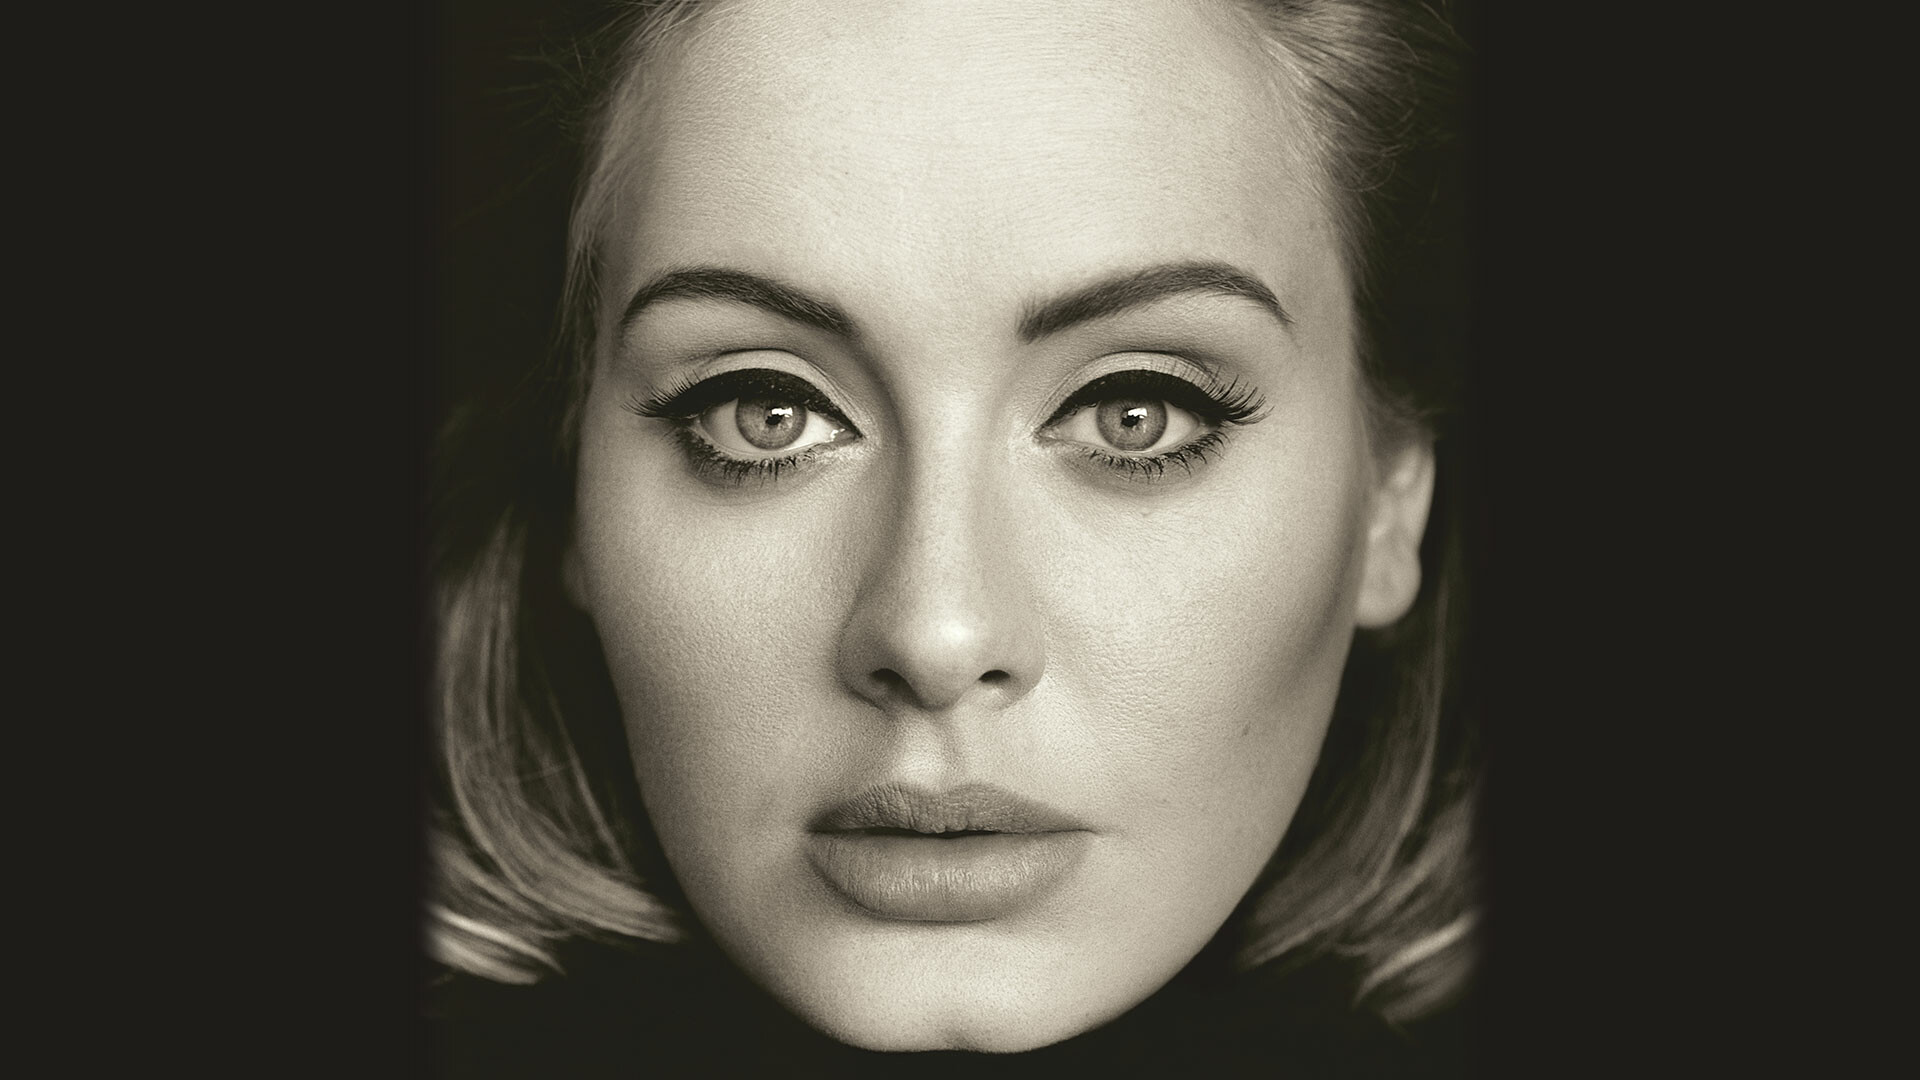 Adele: One of the world's best-selling music artists, Easy on Me. 1920x1080 Full HD Wallpaper.